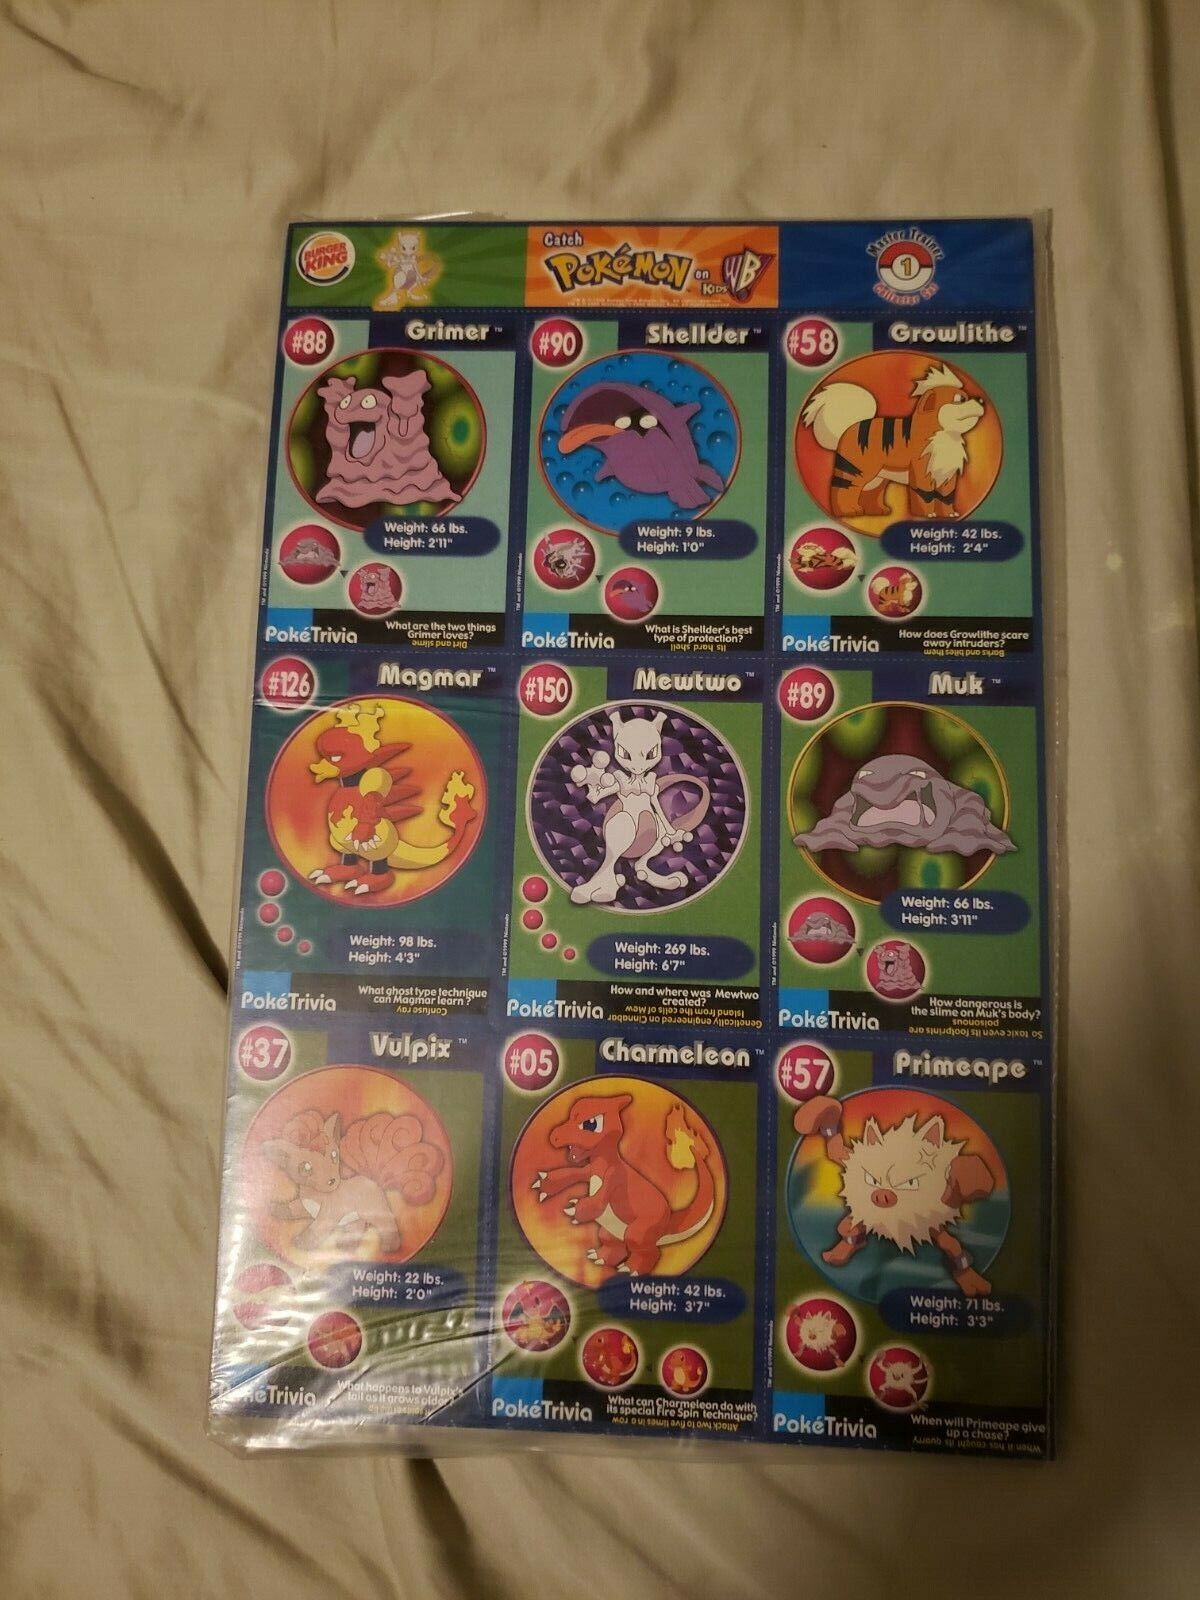 POKEMON 1ST MOVIE CARDS 1999 FULL SET OF 20 BURGER KING MASTER TRAINER ALL UNCUT